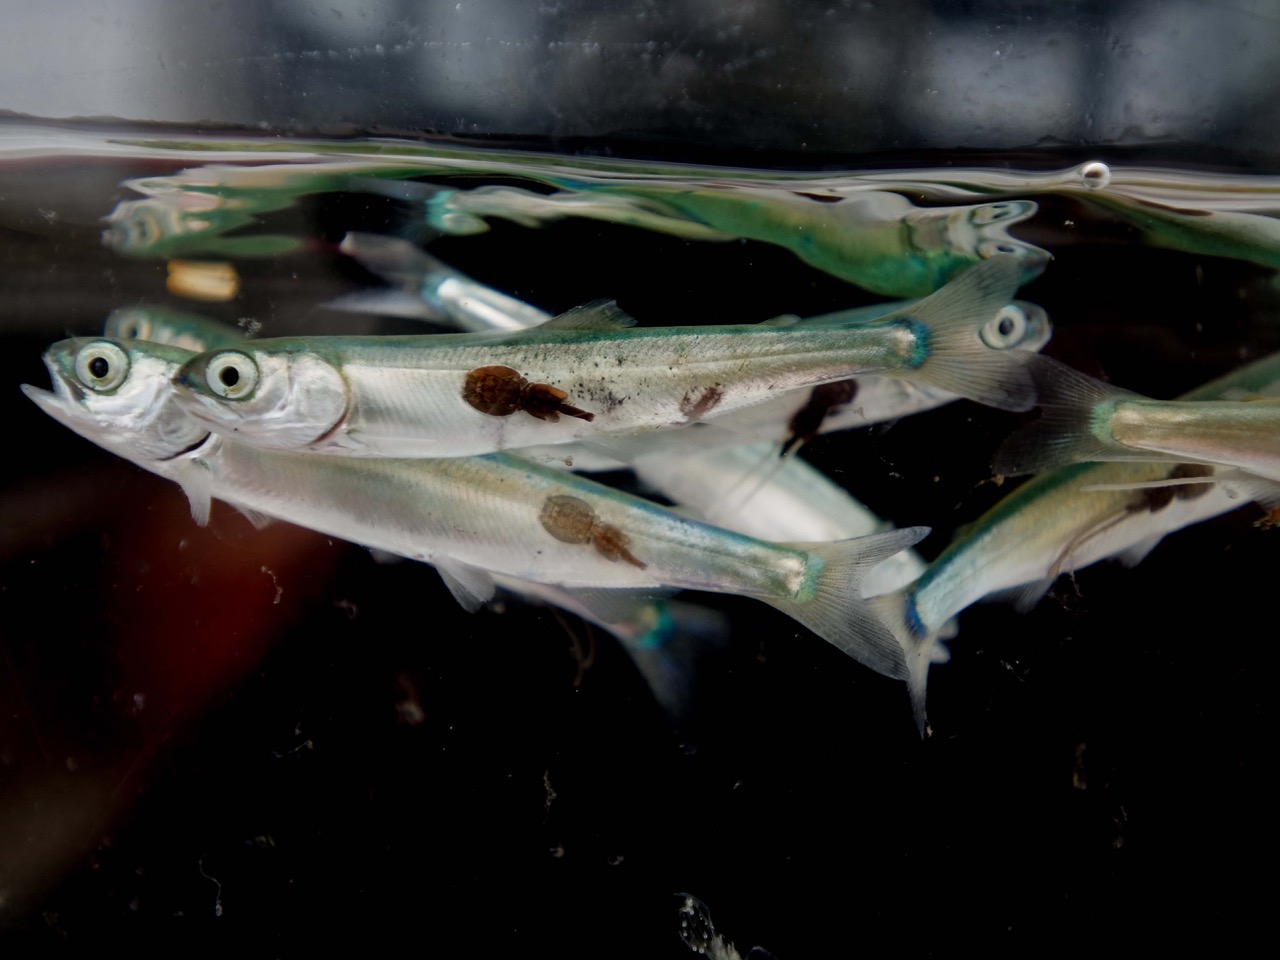 A closeup of several silvery salmon fry with dark spotches on their scales, which are sea lice.